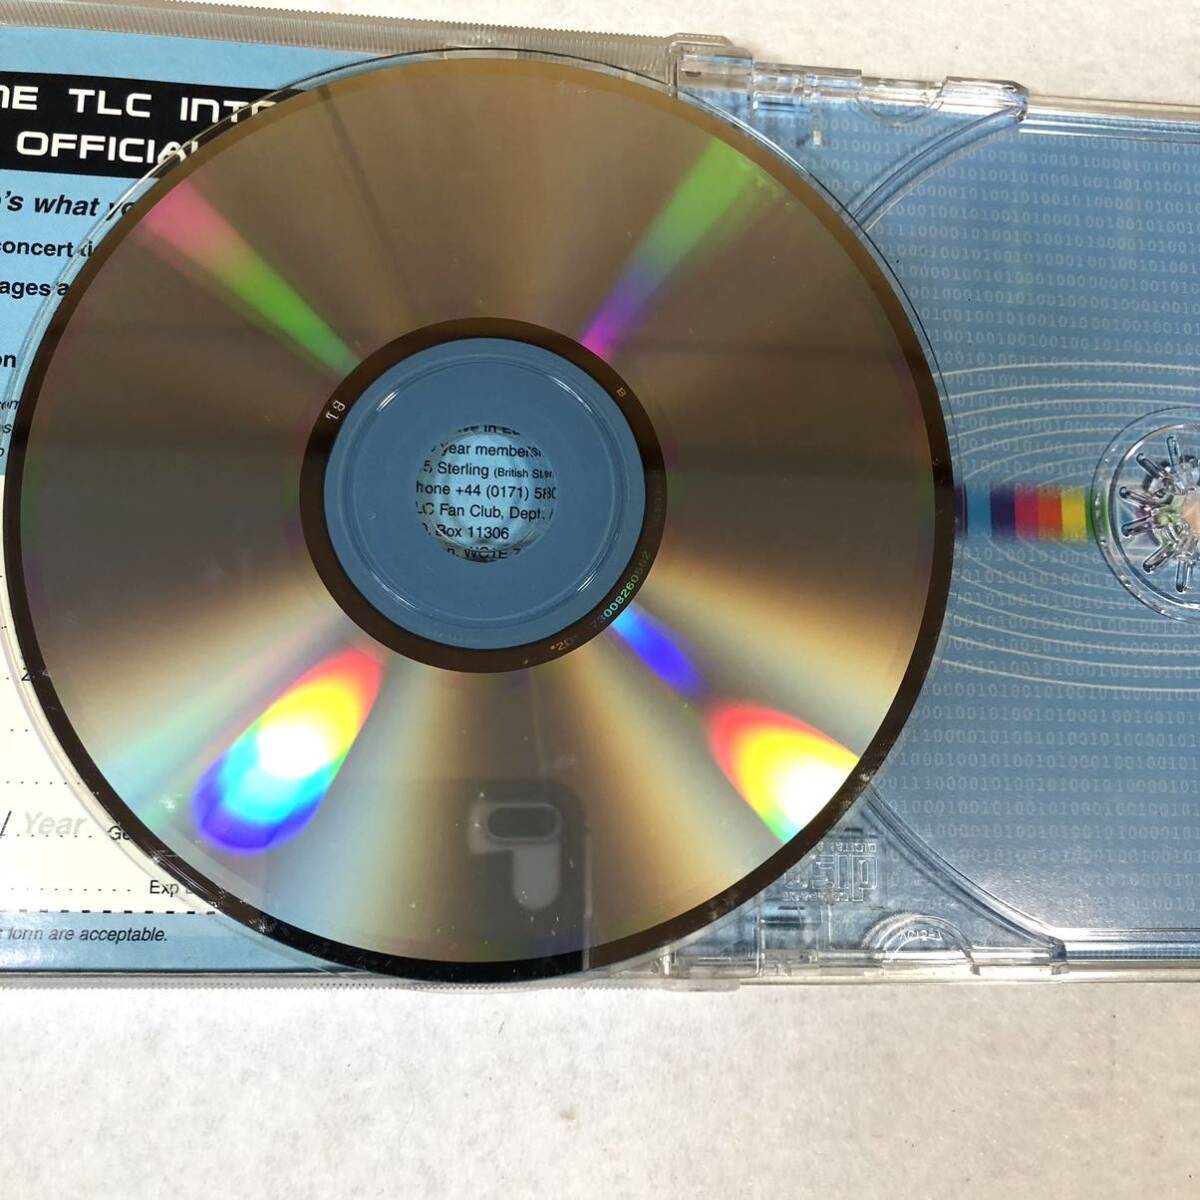 m402 CD[TLC /FANMAIL] foreign record 